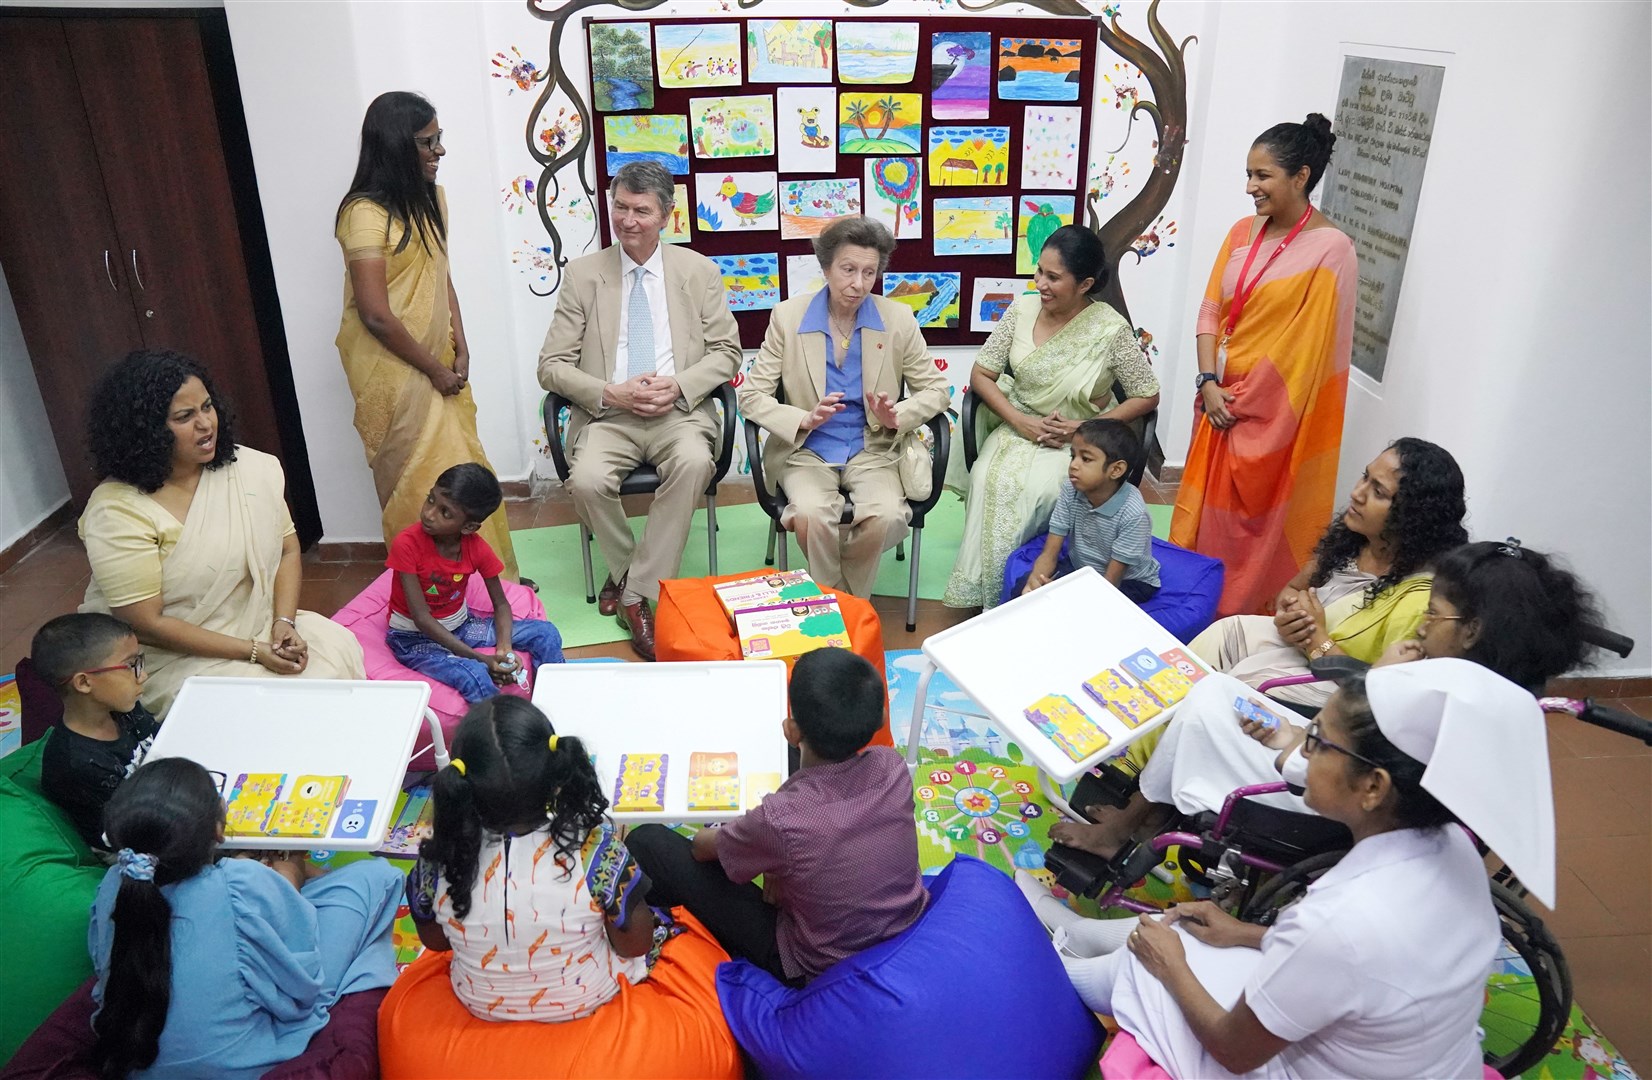 The Princess Royal and Vice Admiral Sir Timothy Laurence engage with a group of children and staff using a social-emotional learning toolkit for children during a visit to the Lady Ridgeway Hospital for Children in Colombo (Jonathan Brady/PA)